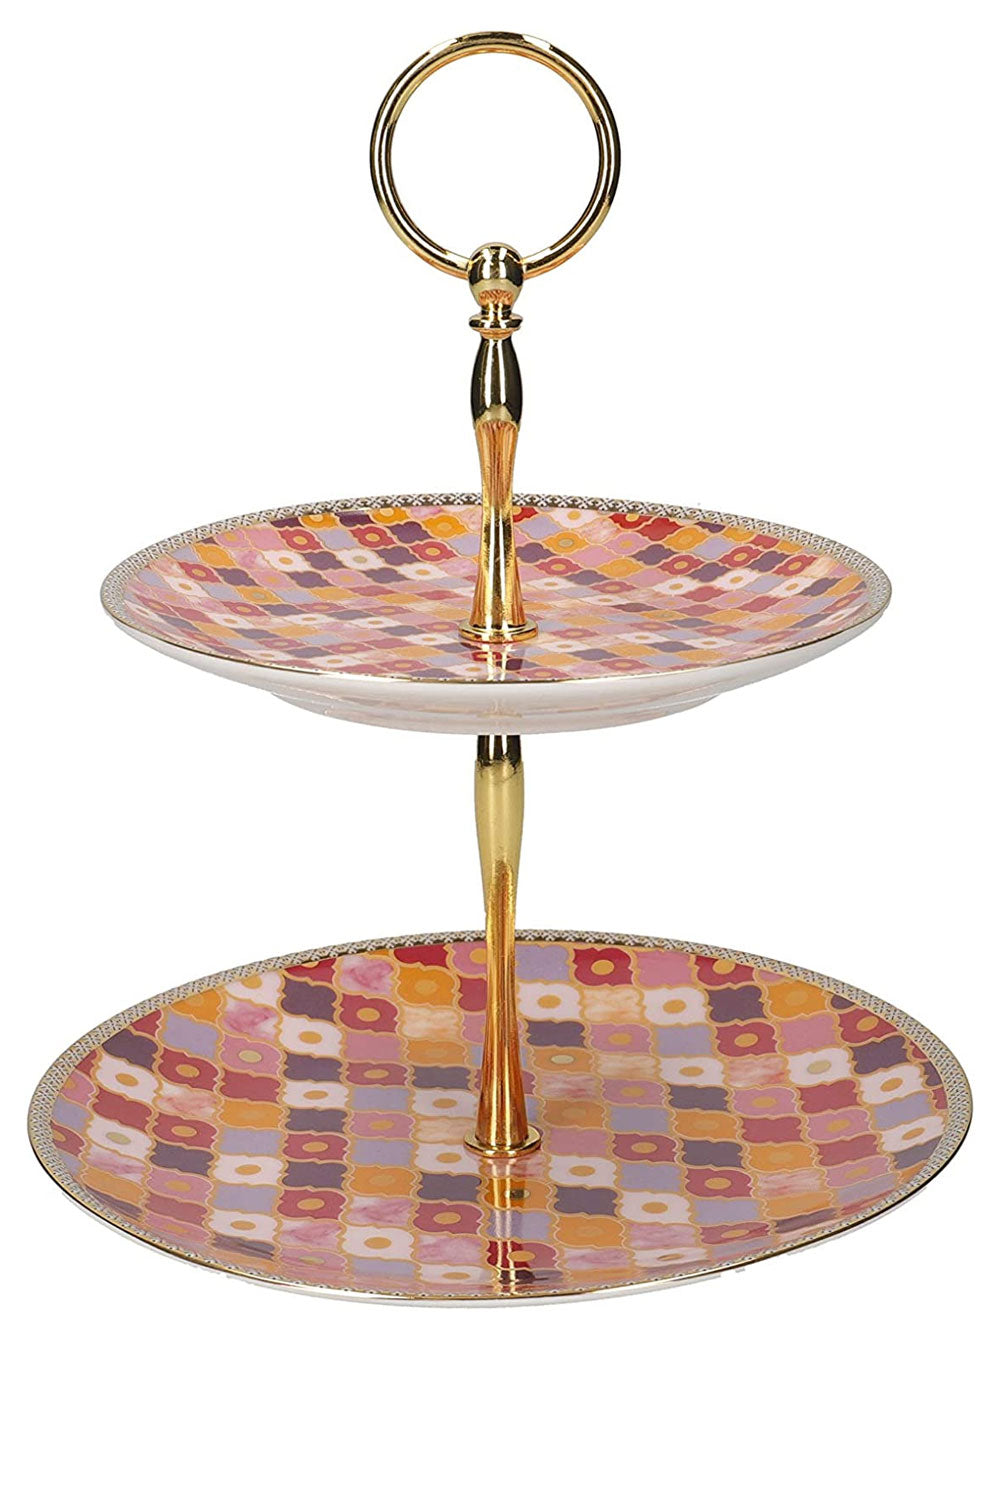 Teas & C'S Kasbah Two Tier Cake Stand - Maison7